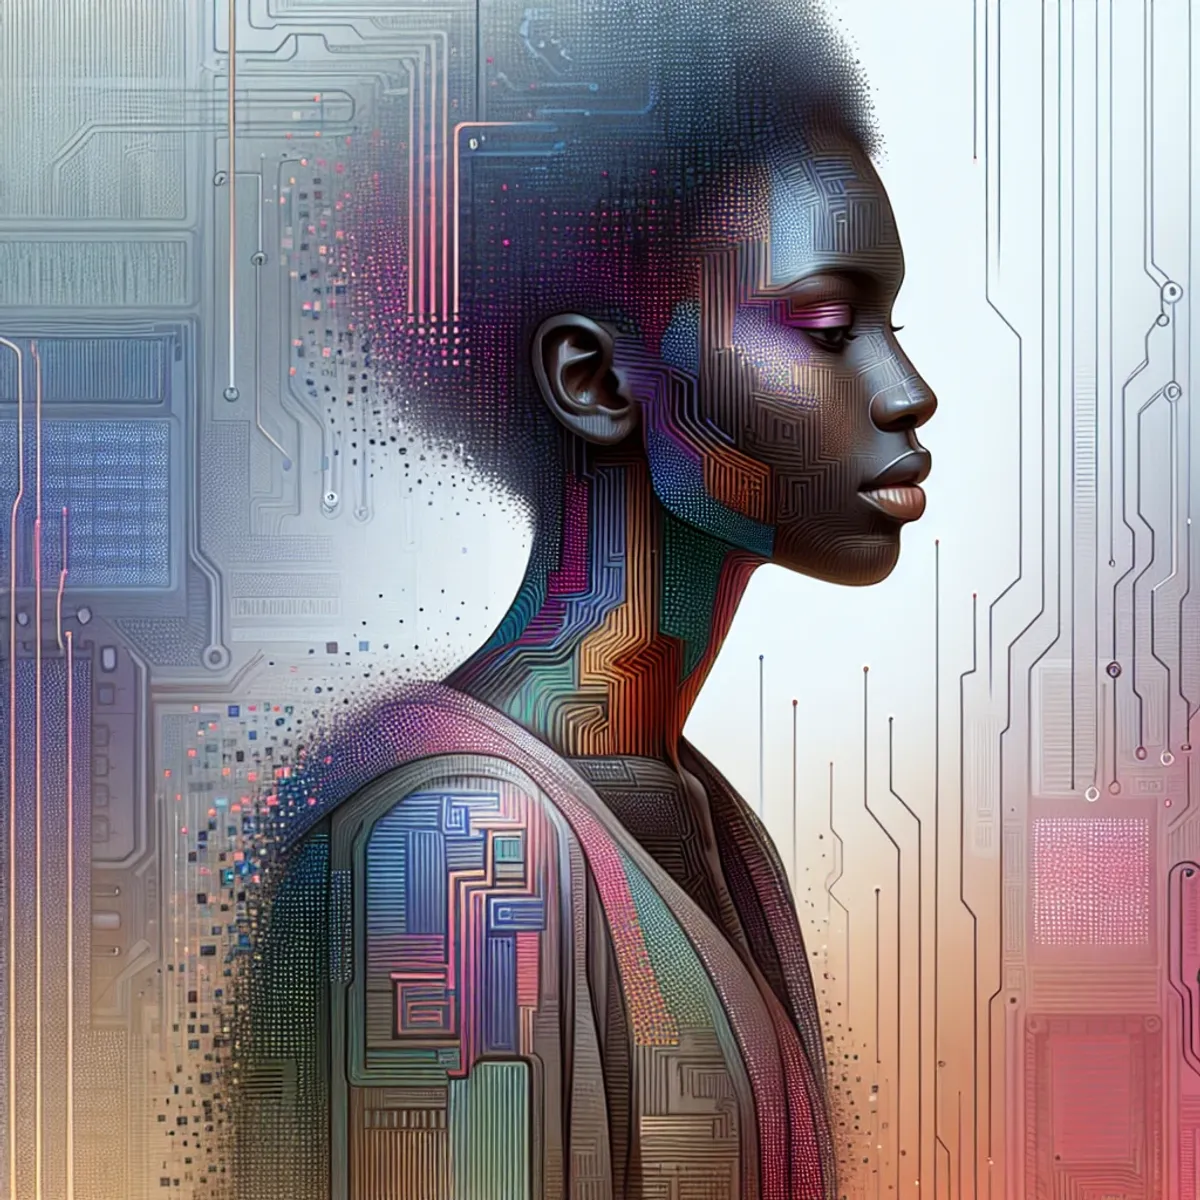 A portrait of a person with African descent and gender-neutral identity, featuring abstract pixel-like patterns in their clothing and surroundings, with hints of binary code and motherboard circuitry.